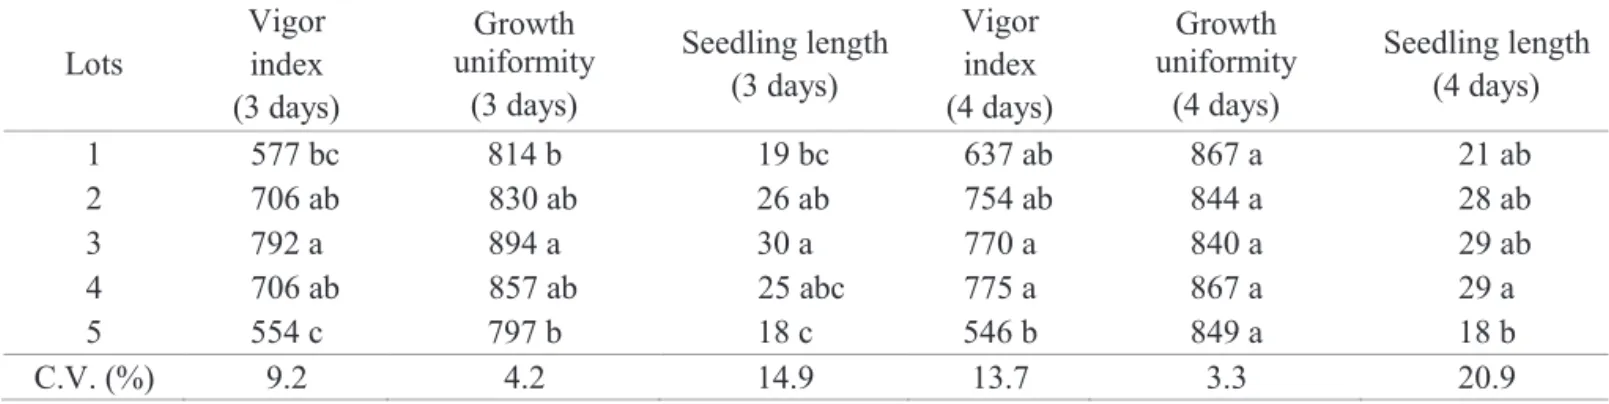 Figure 1. Digital images of Crotalaria seedlings three days after sowing from a repetition of high and low  vigor  lots,  lots   3 (A)  and  5 (B),  respectively,  analyzed by  the  automated evaluation system of seed vigor (SVIS).